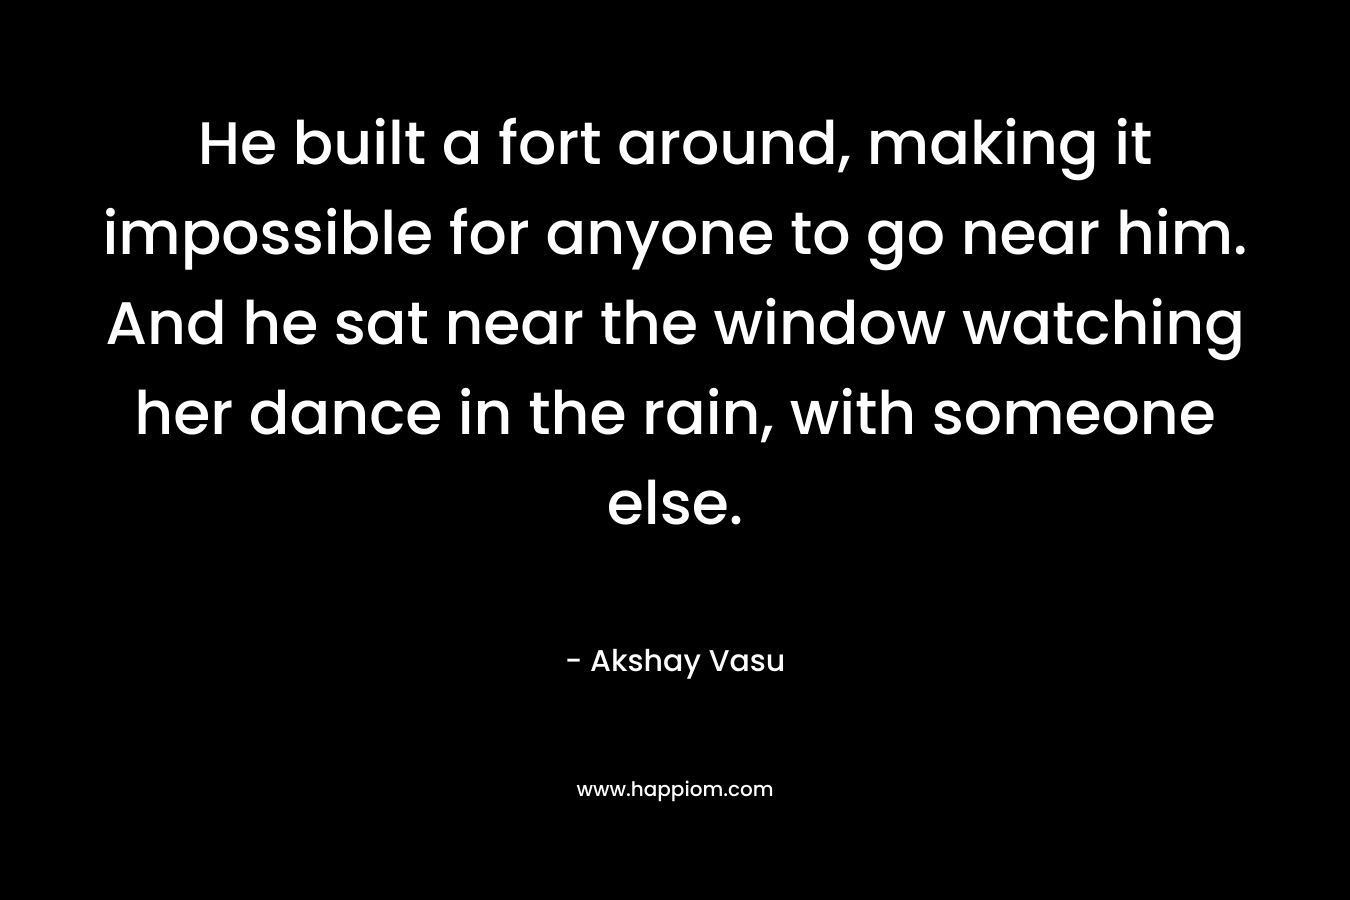 He built a fort around, making it impossible for anyone to go near him. And he sat near the window watching her dance in the rain, with someone else.